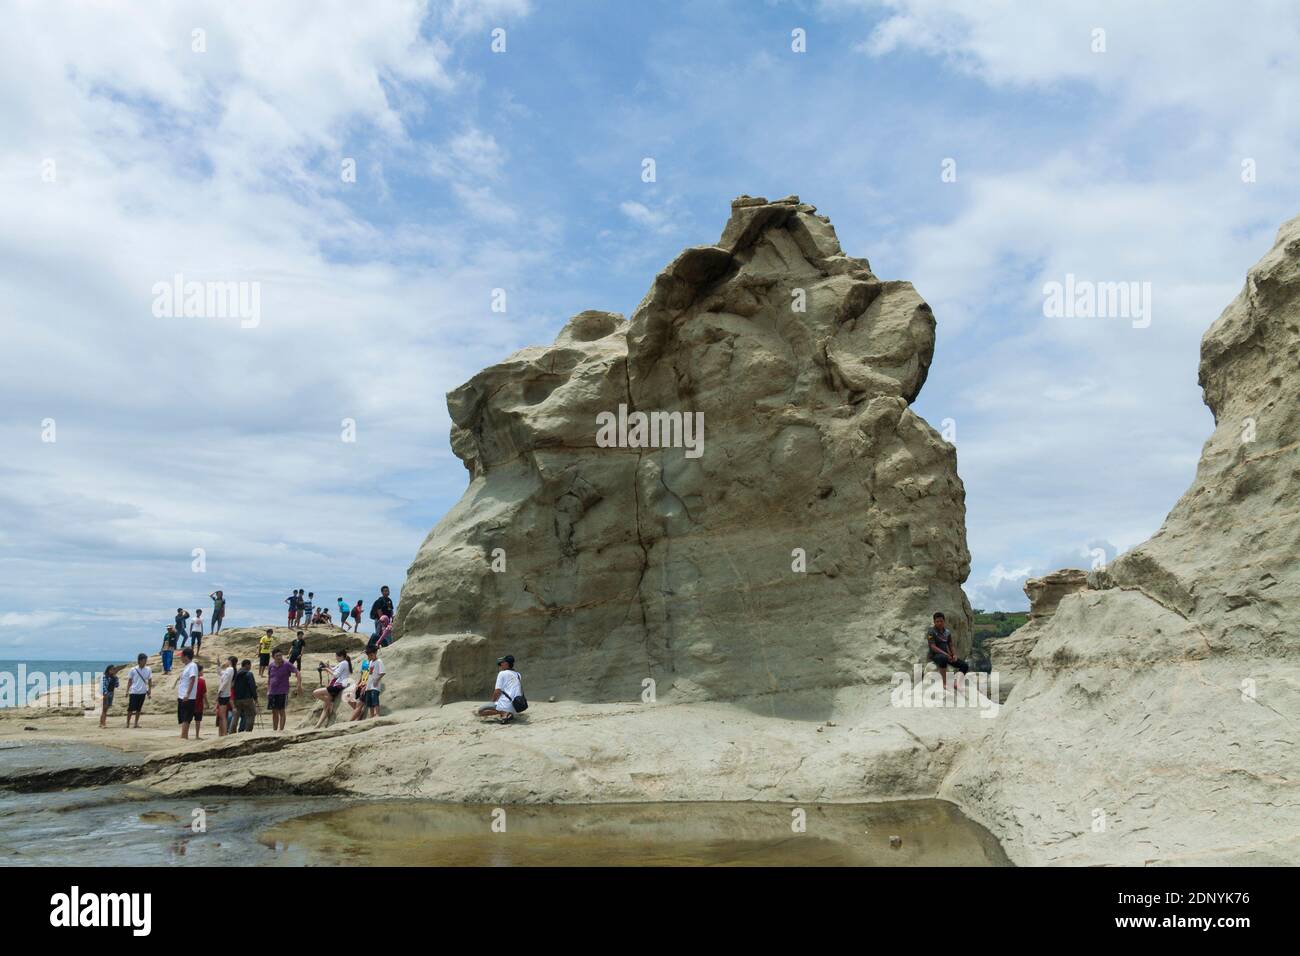 Klayar Beach is one of the tourist destinations in Pacitan district, East Java. Stock Photo